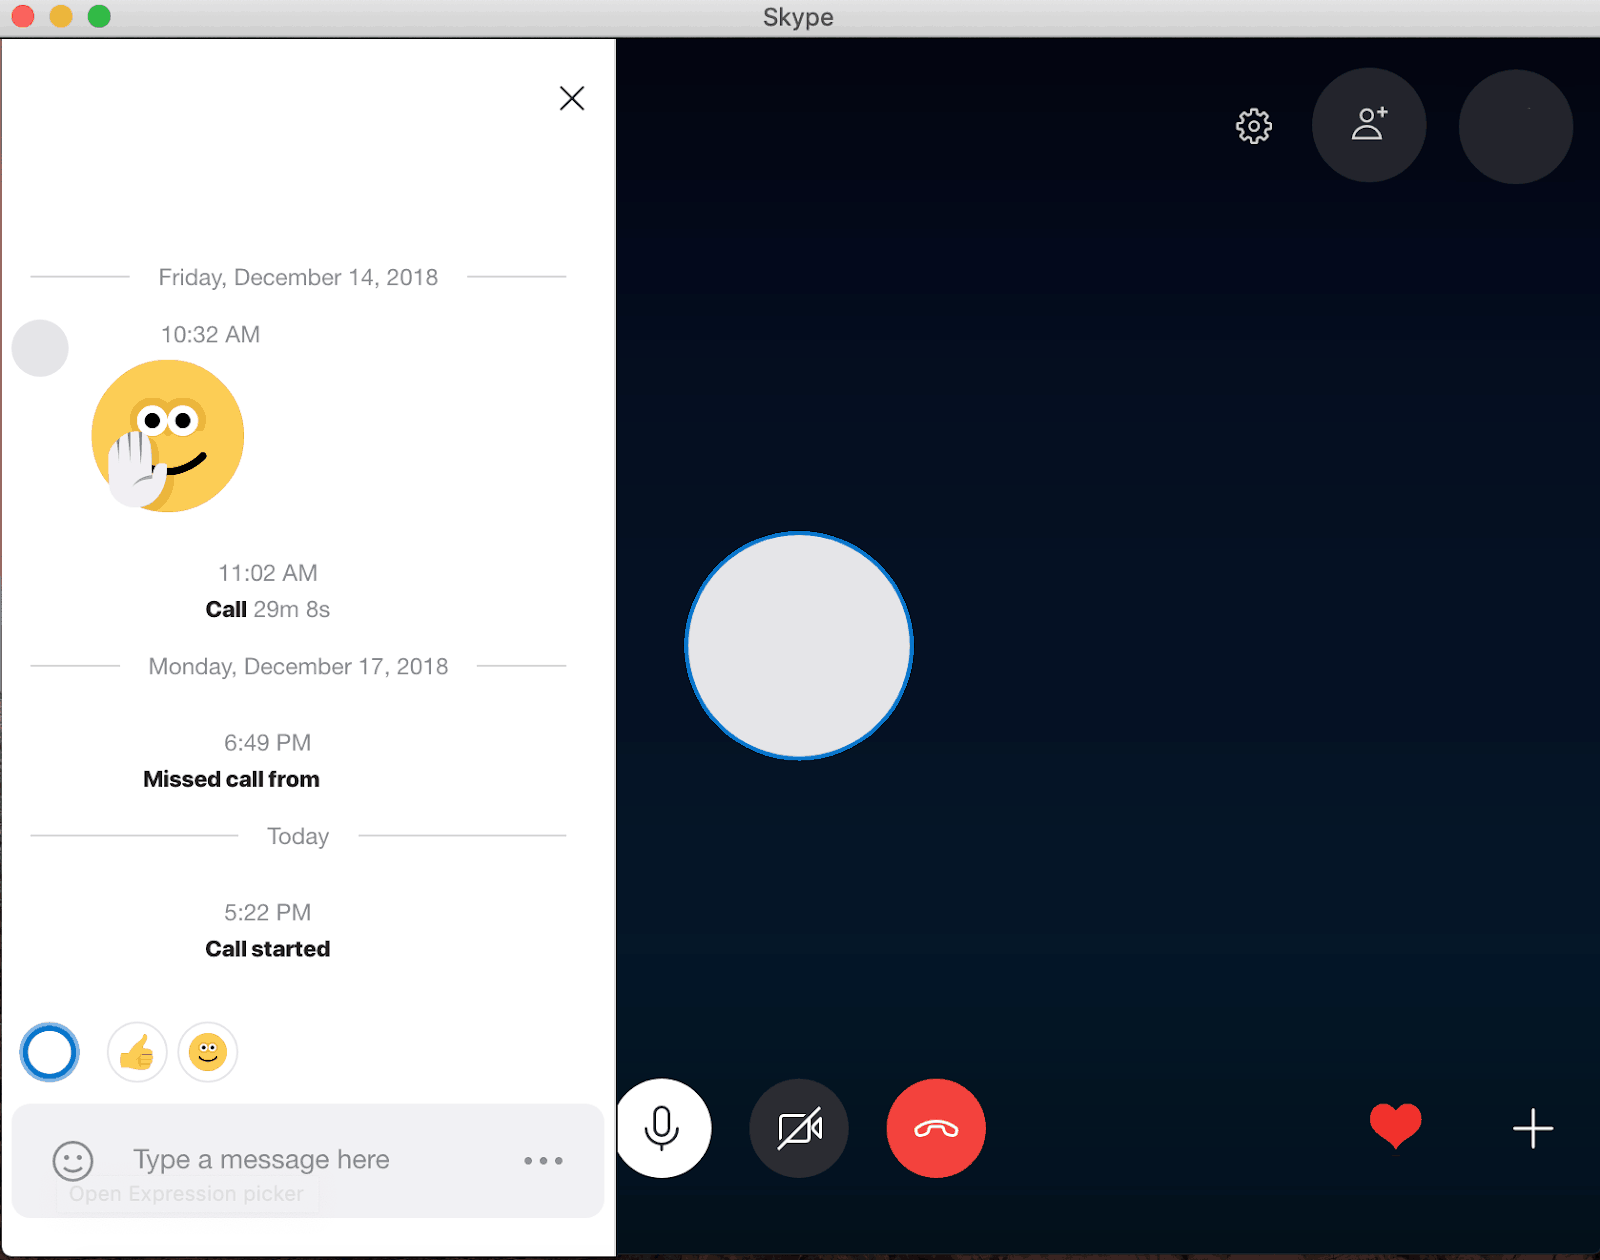 delete mood messages on skype for mac